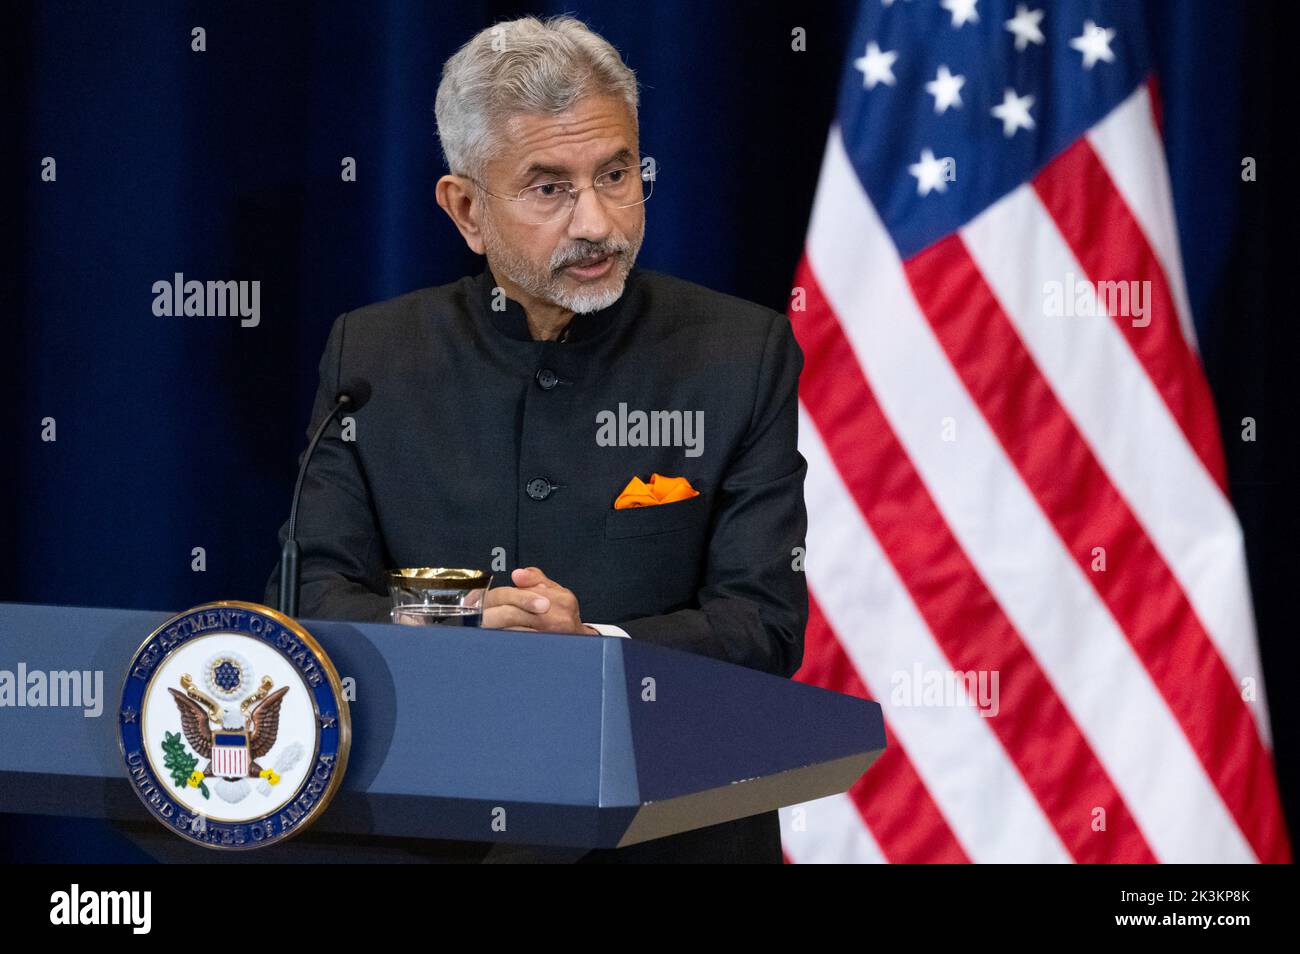 India's Foreign Minister Subrahmanyam Jaishankar attends a press conference with U.S. Secretary of State Antony Blinken at the State Department in Washington, U.S., September 27, 2022. Saul Loeb/Pool via REUTERS Stock Photo